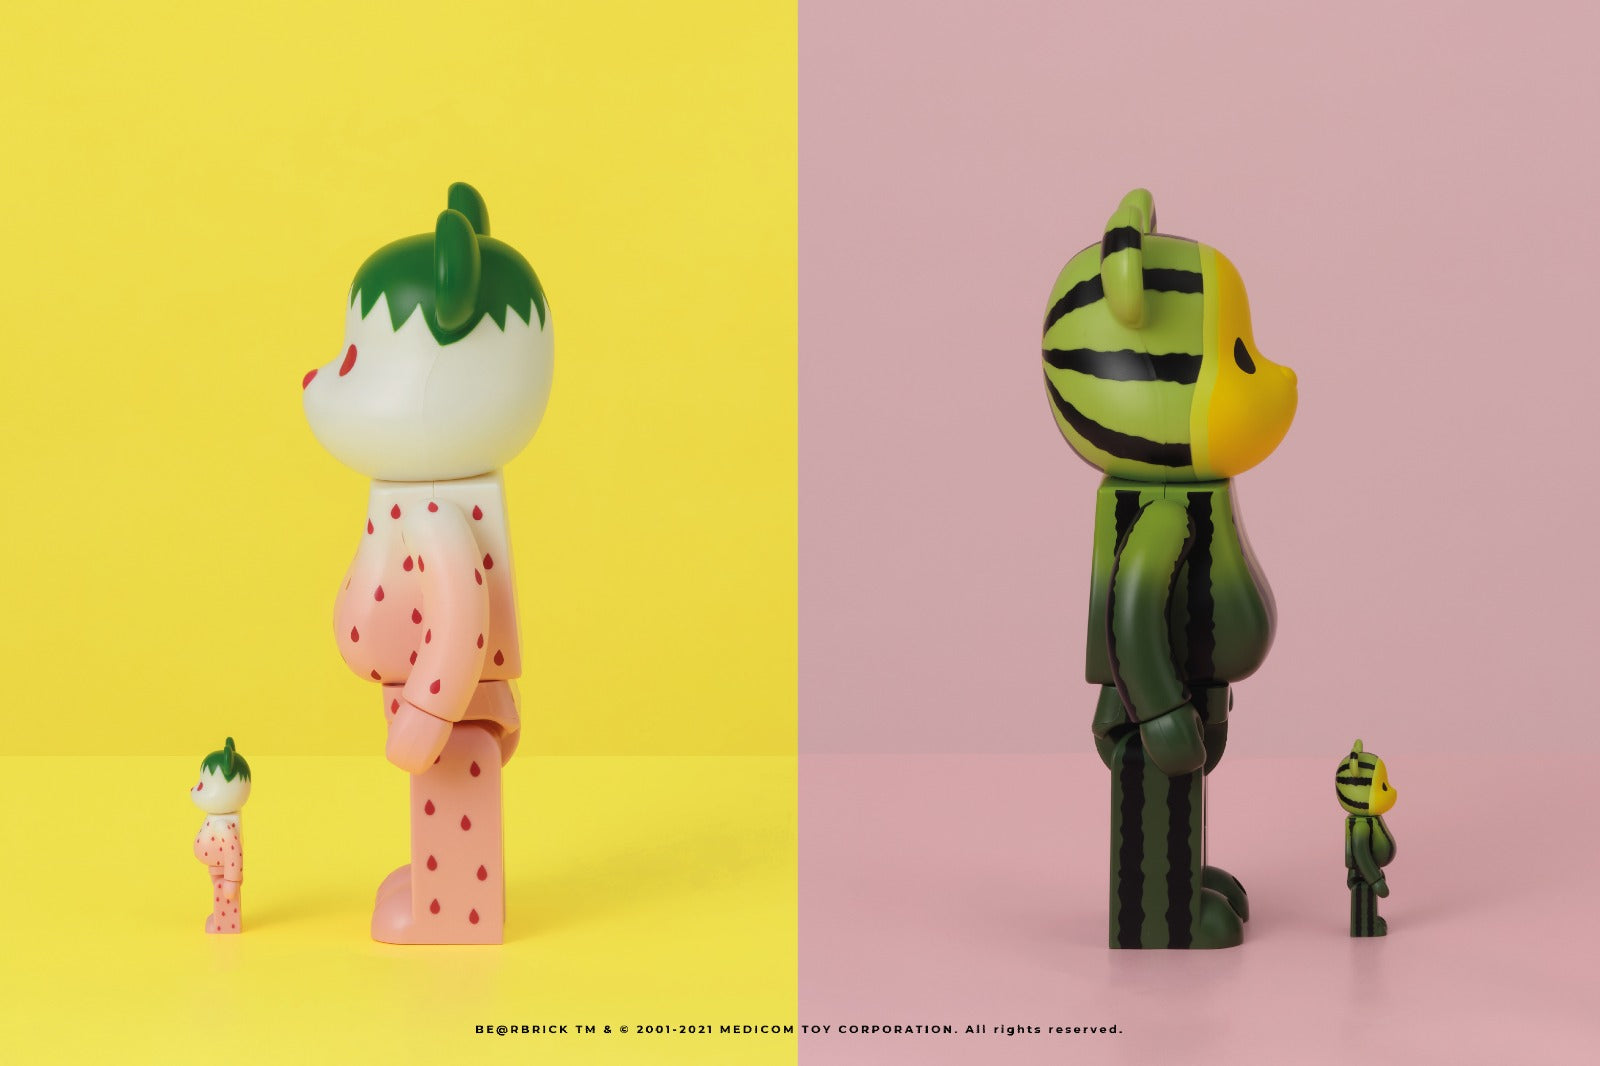 CLOT Continues the Fruit BE@RBRICK Series with the Snow Strawberry